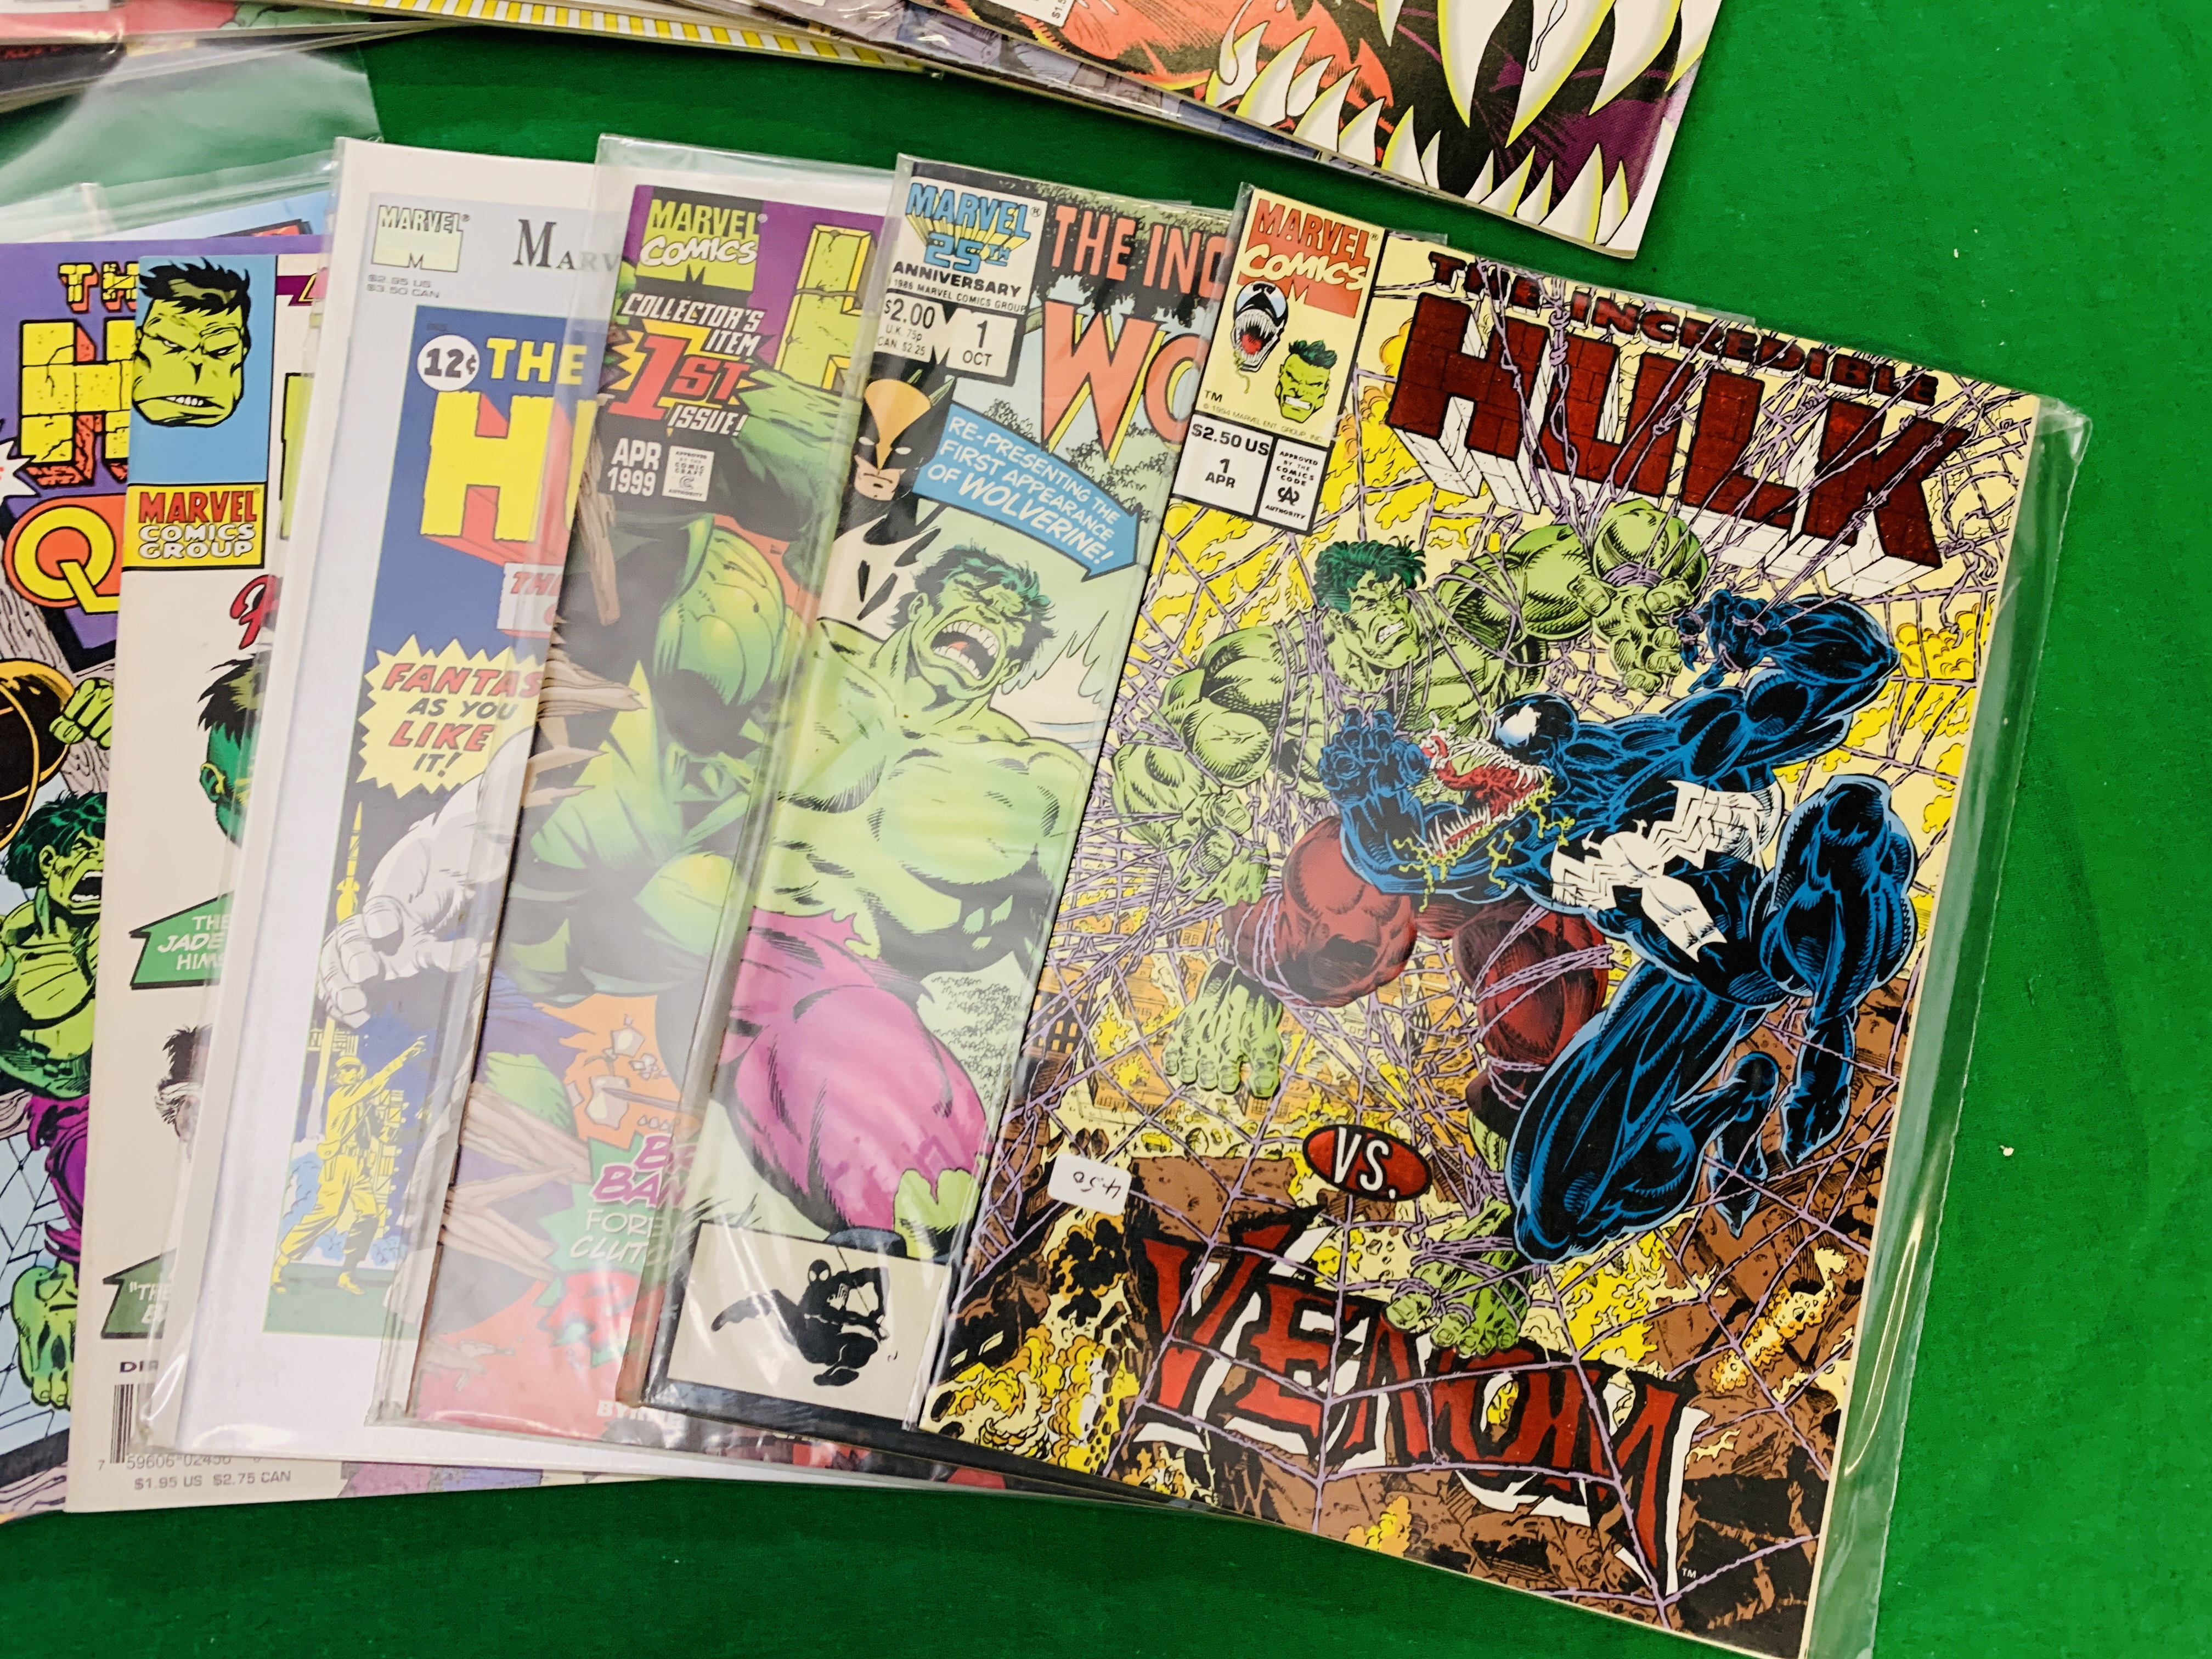 COLLECTION OF HULK MARVEL COMICS: HULK 2099 NO. 1 - 5, 10 FROM 1994. NO. 2 - 4 HAVE RUSTY STAPLES. - Image 2 of 5